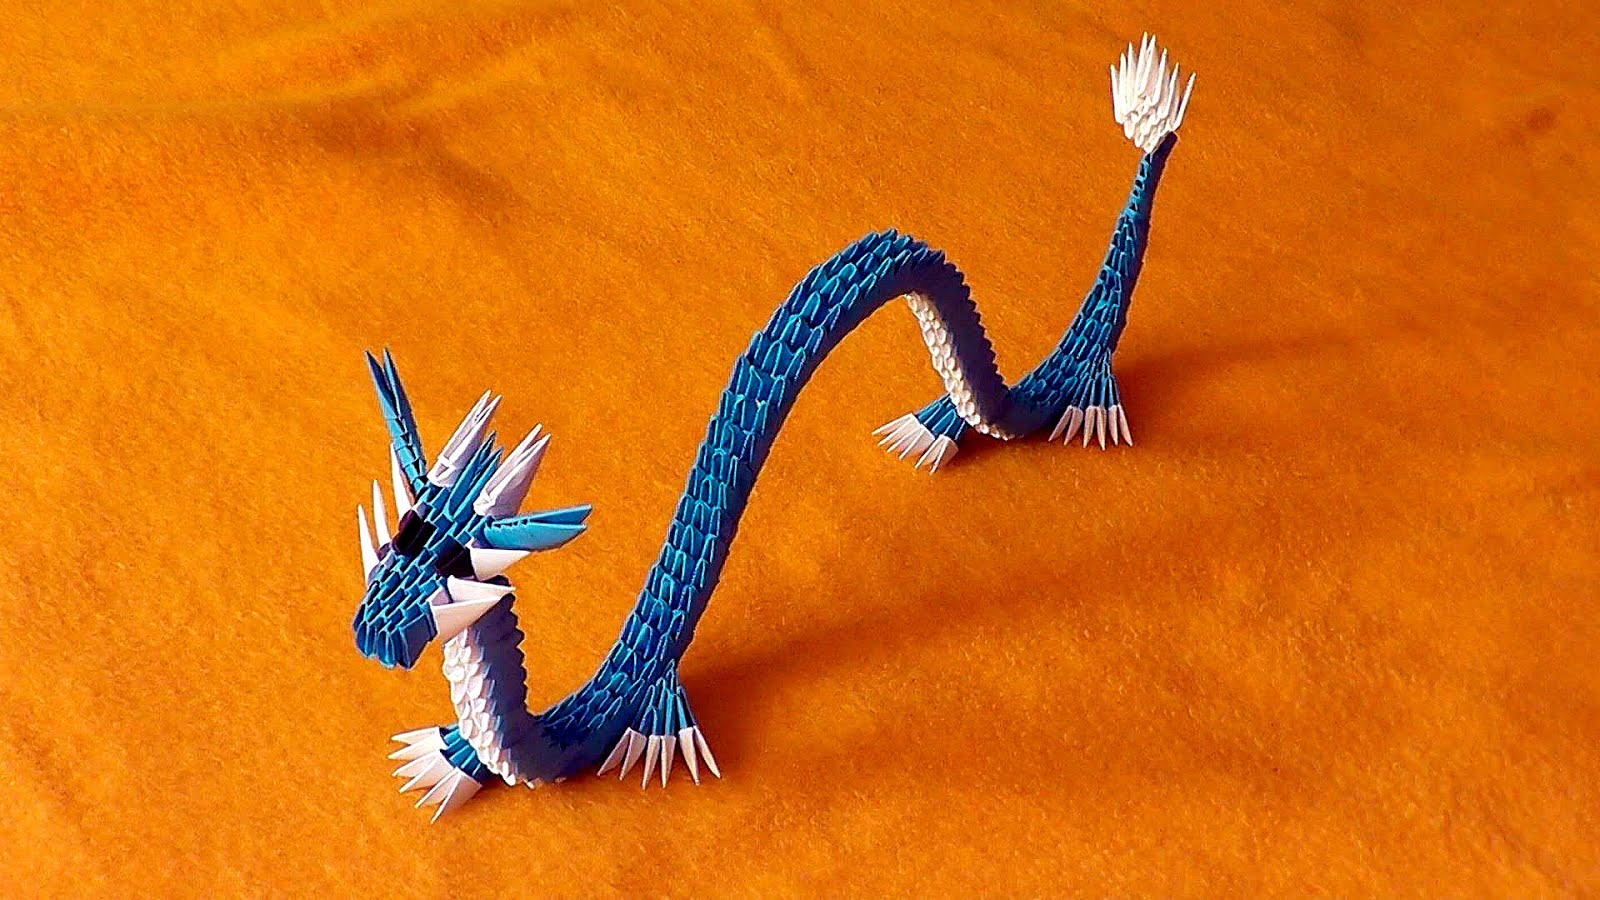 How To Make A 3d Origami Dragon Step By Step Origami Choices